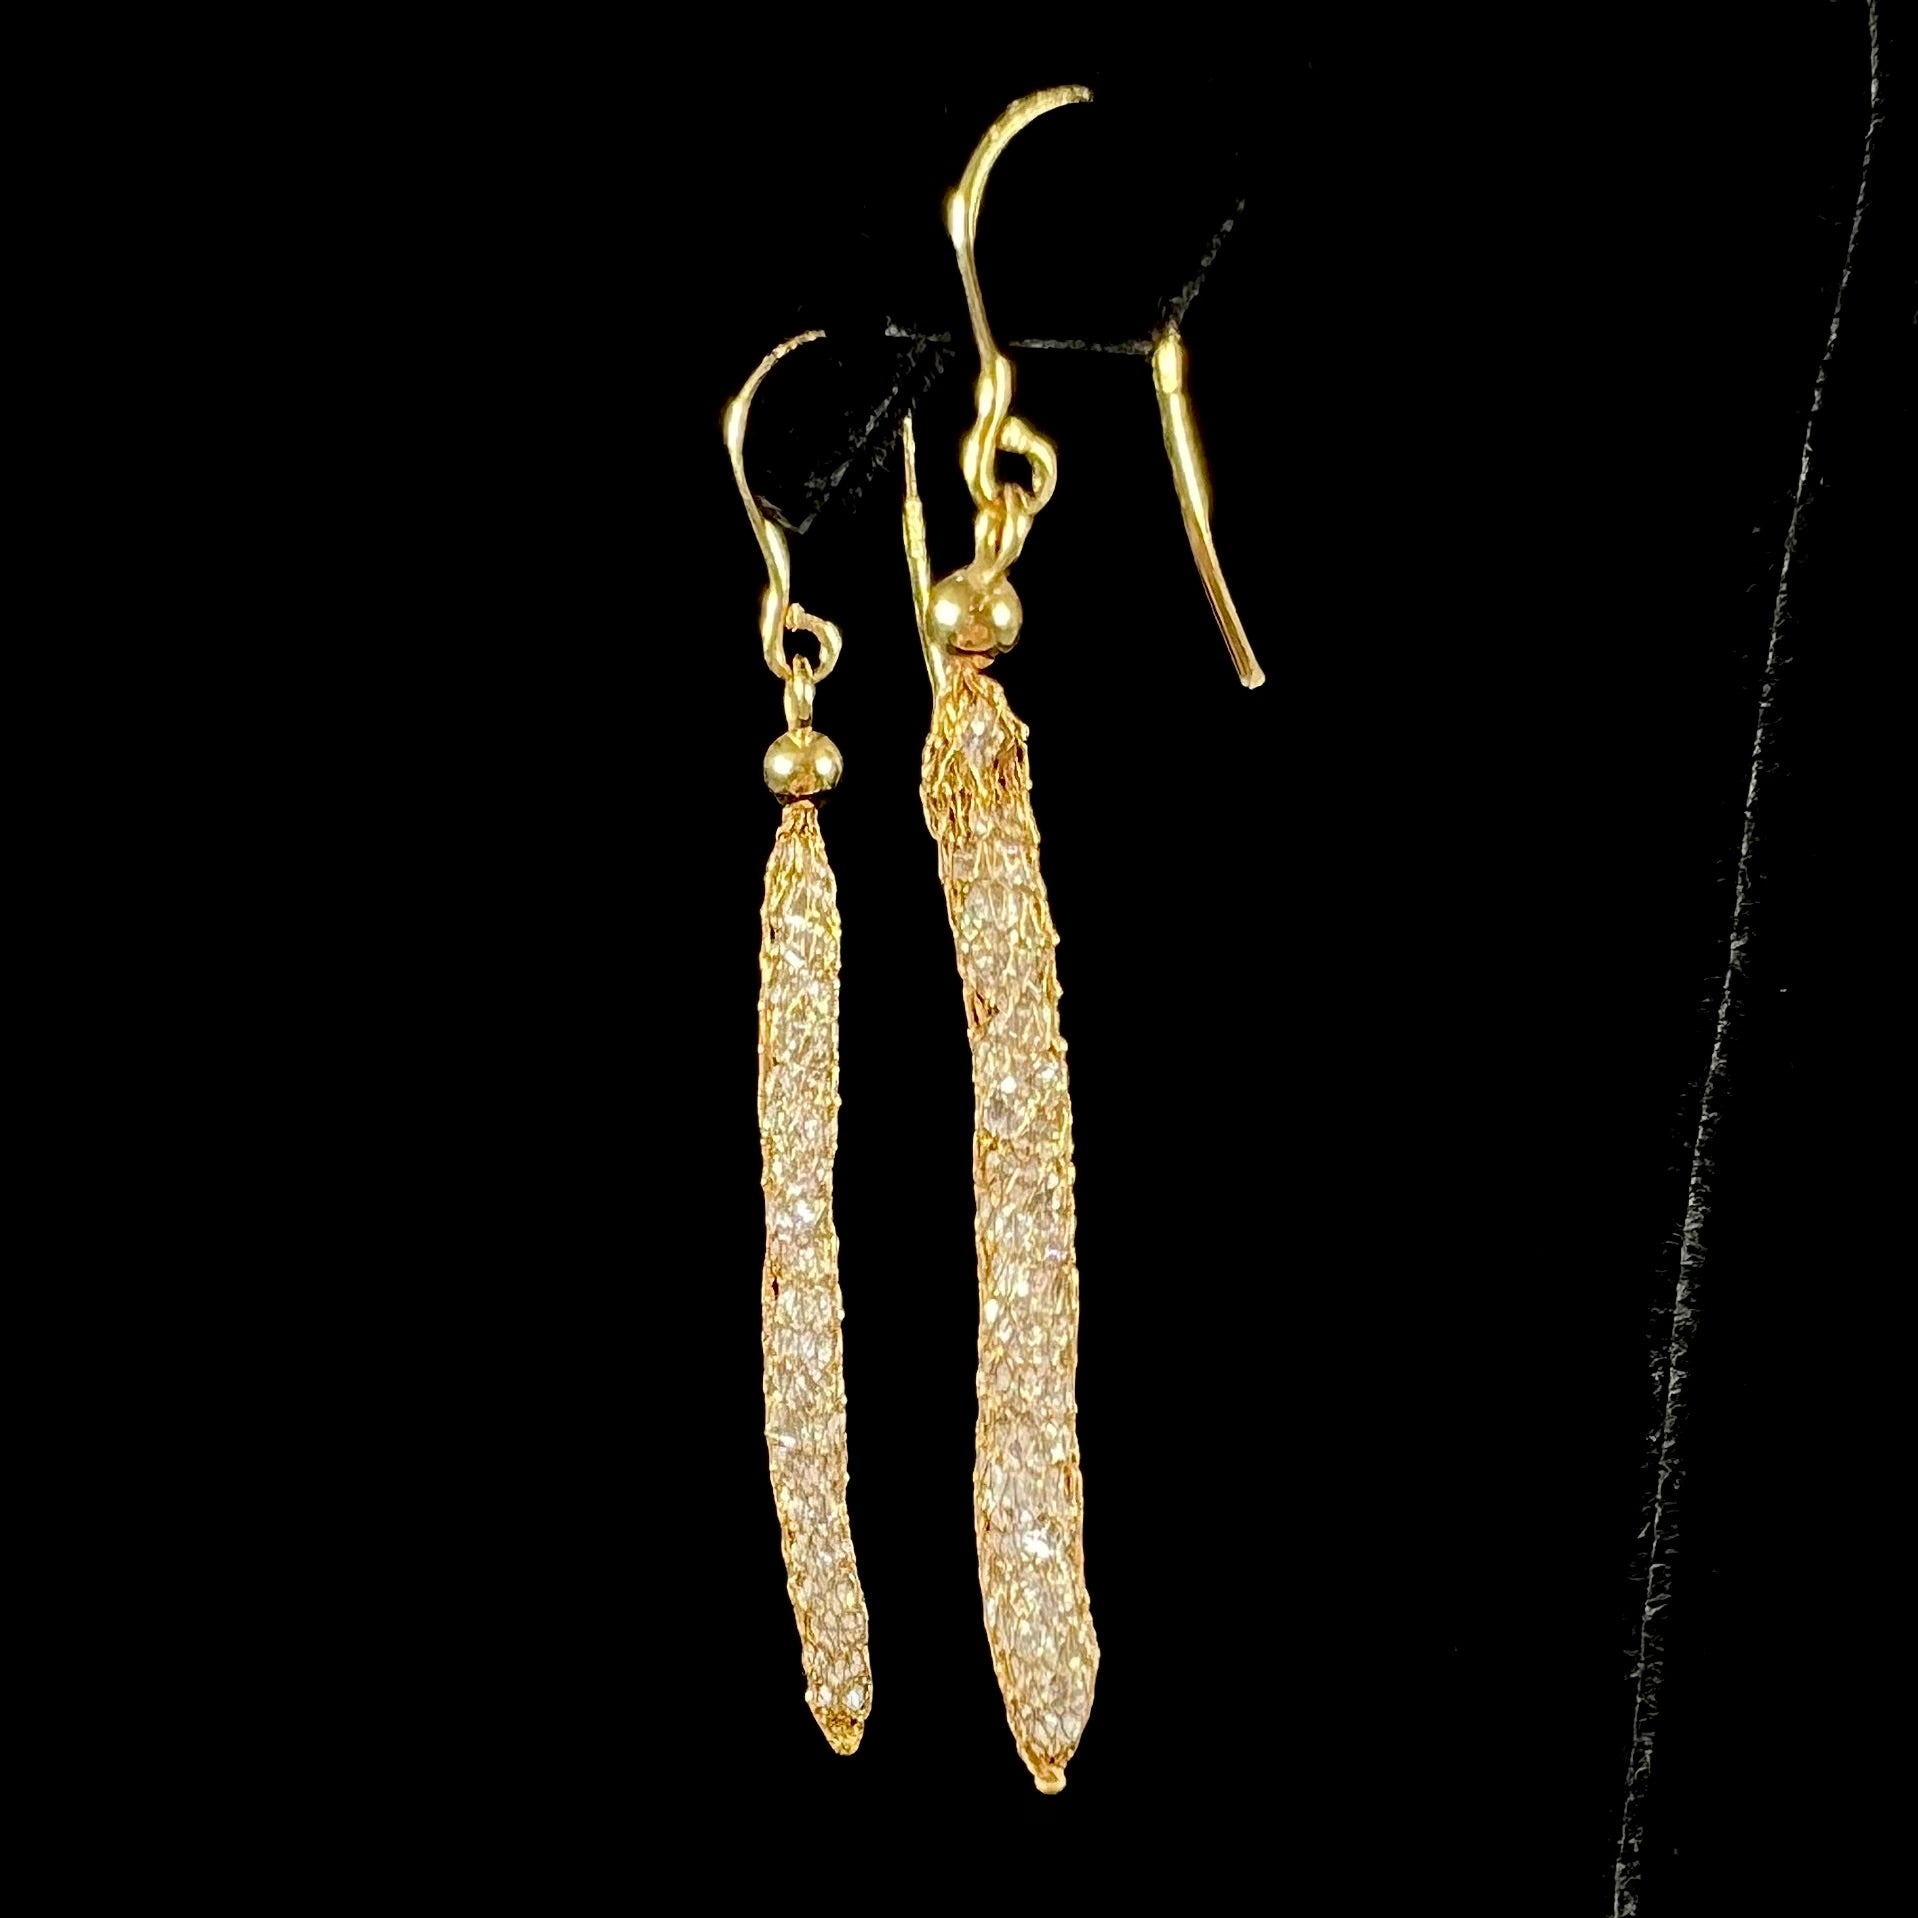 Yellow gold dangle earrings featuring a mesh cage filled with round brilliant cut cubic zirconia stones.